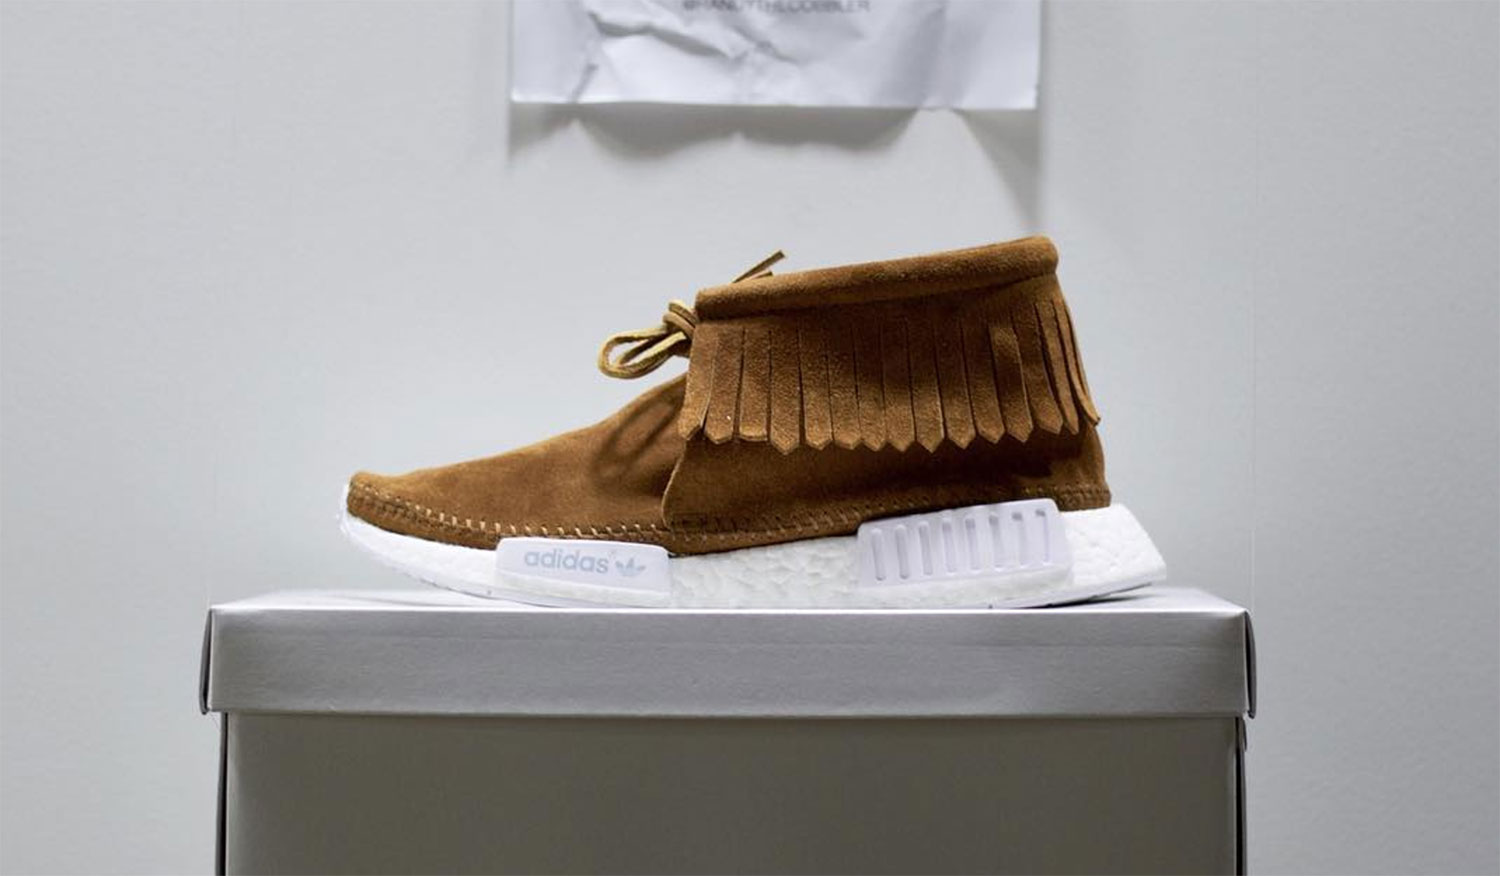 Adidas NMD Gets A Moccasin Update For FW16